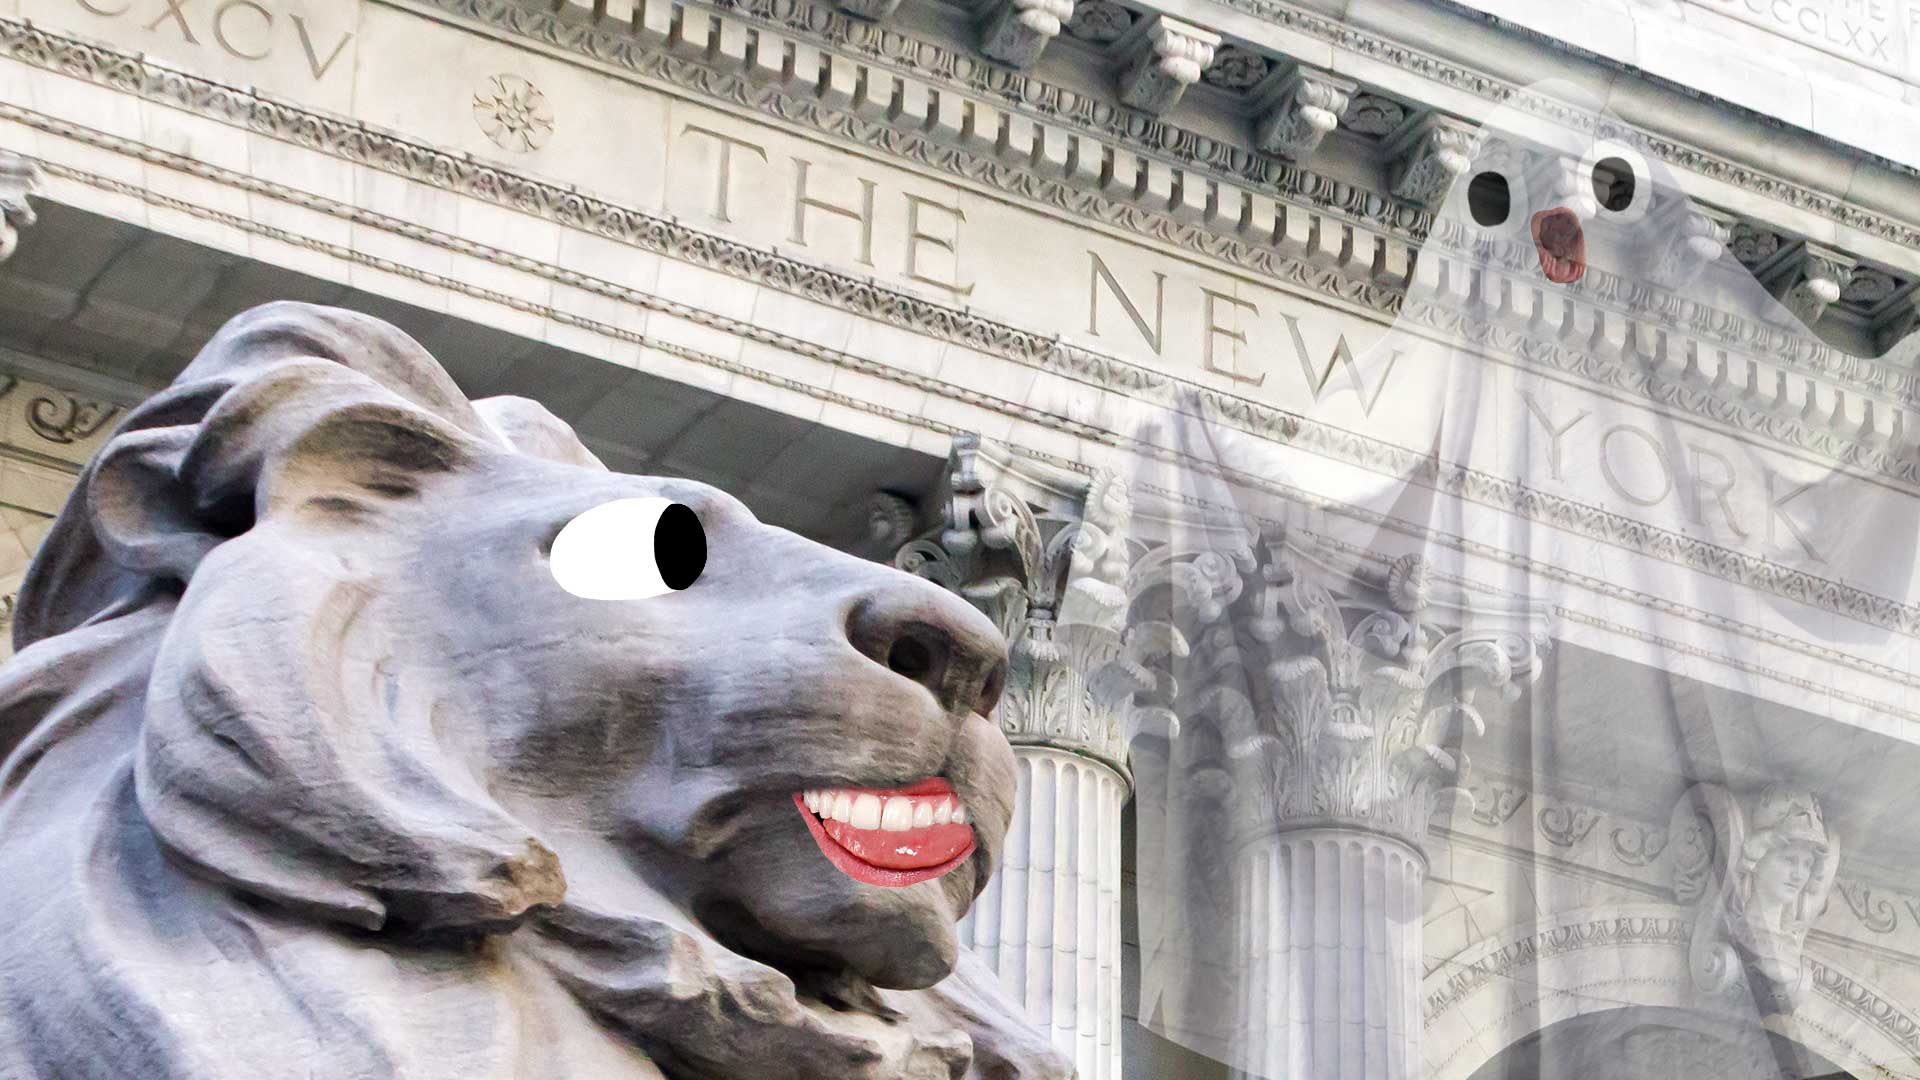 A ghost outside of the New York Public Library 